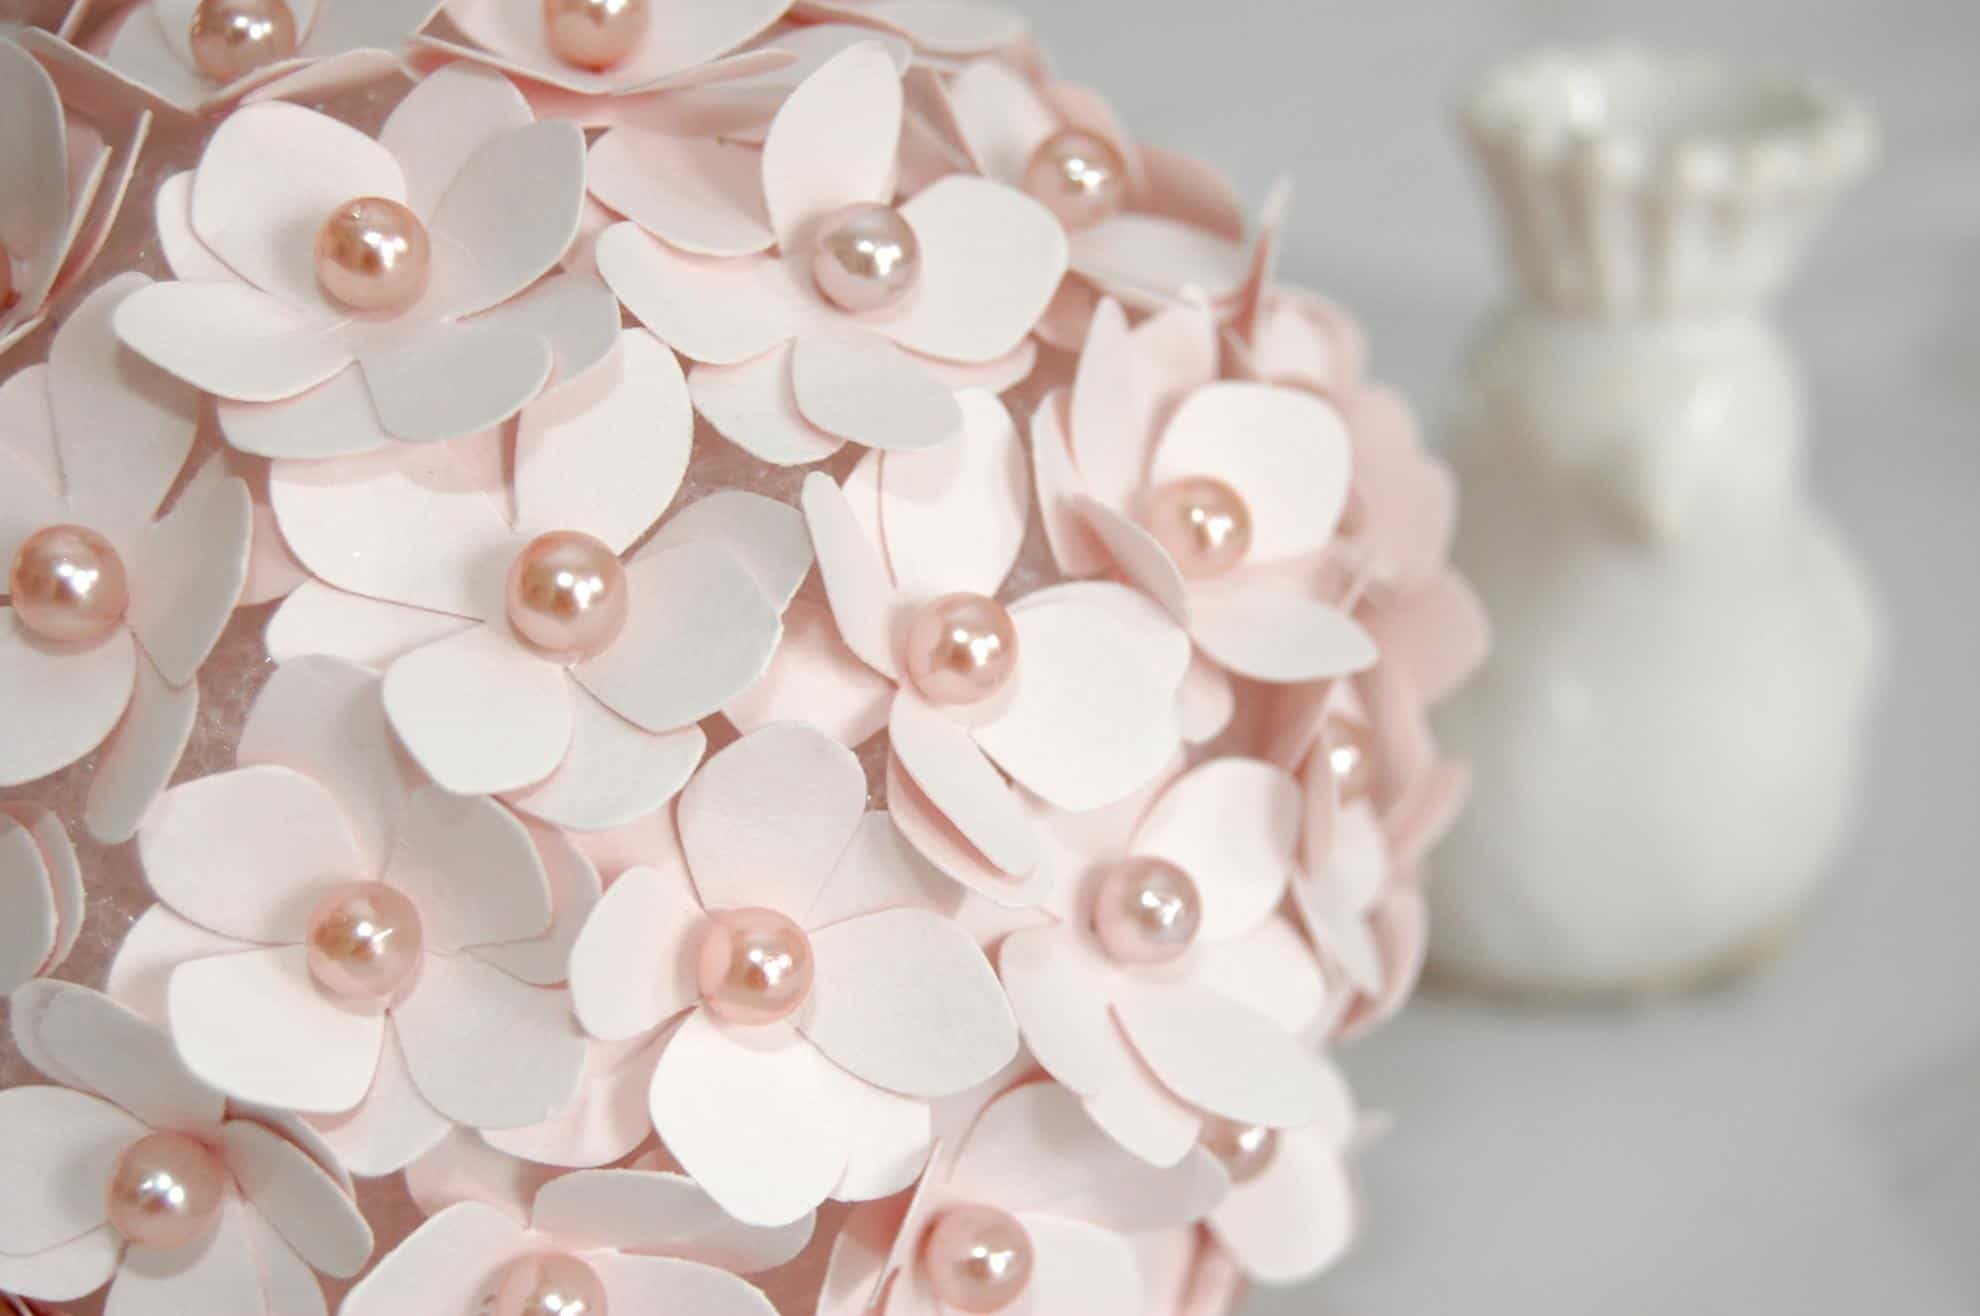 6 Vintage Flower Themed DIY Projects